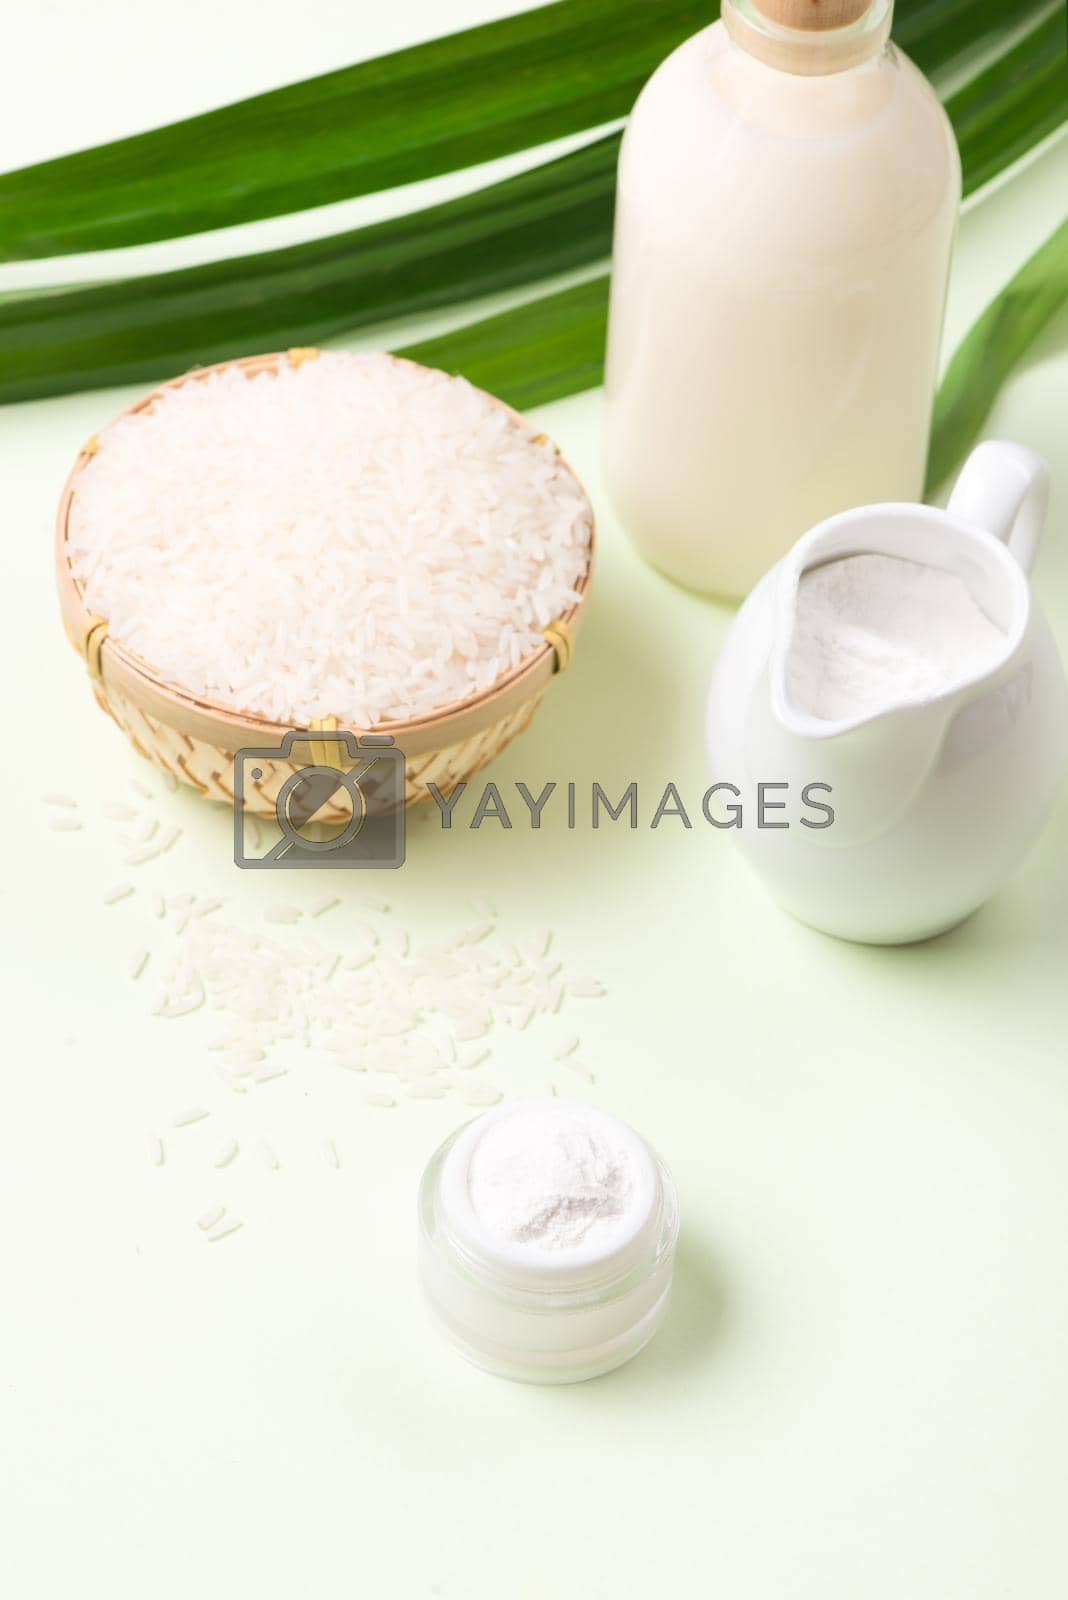 Royalty free image of Rice milk, with rice grains by makidotvn